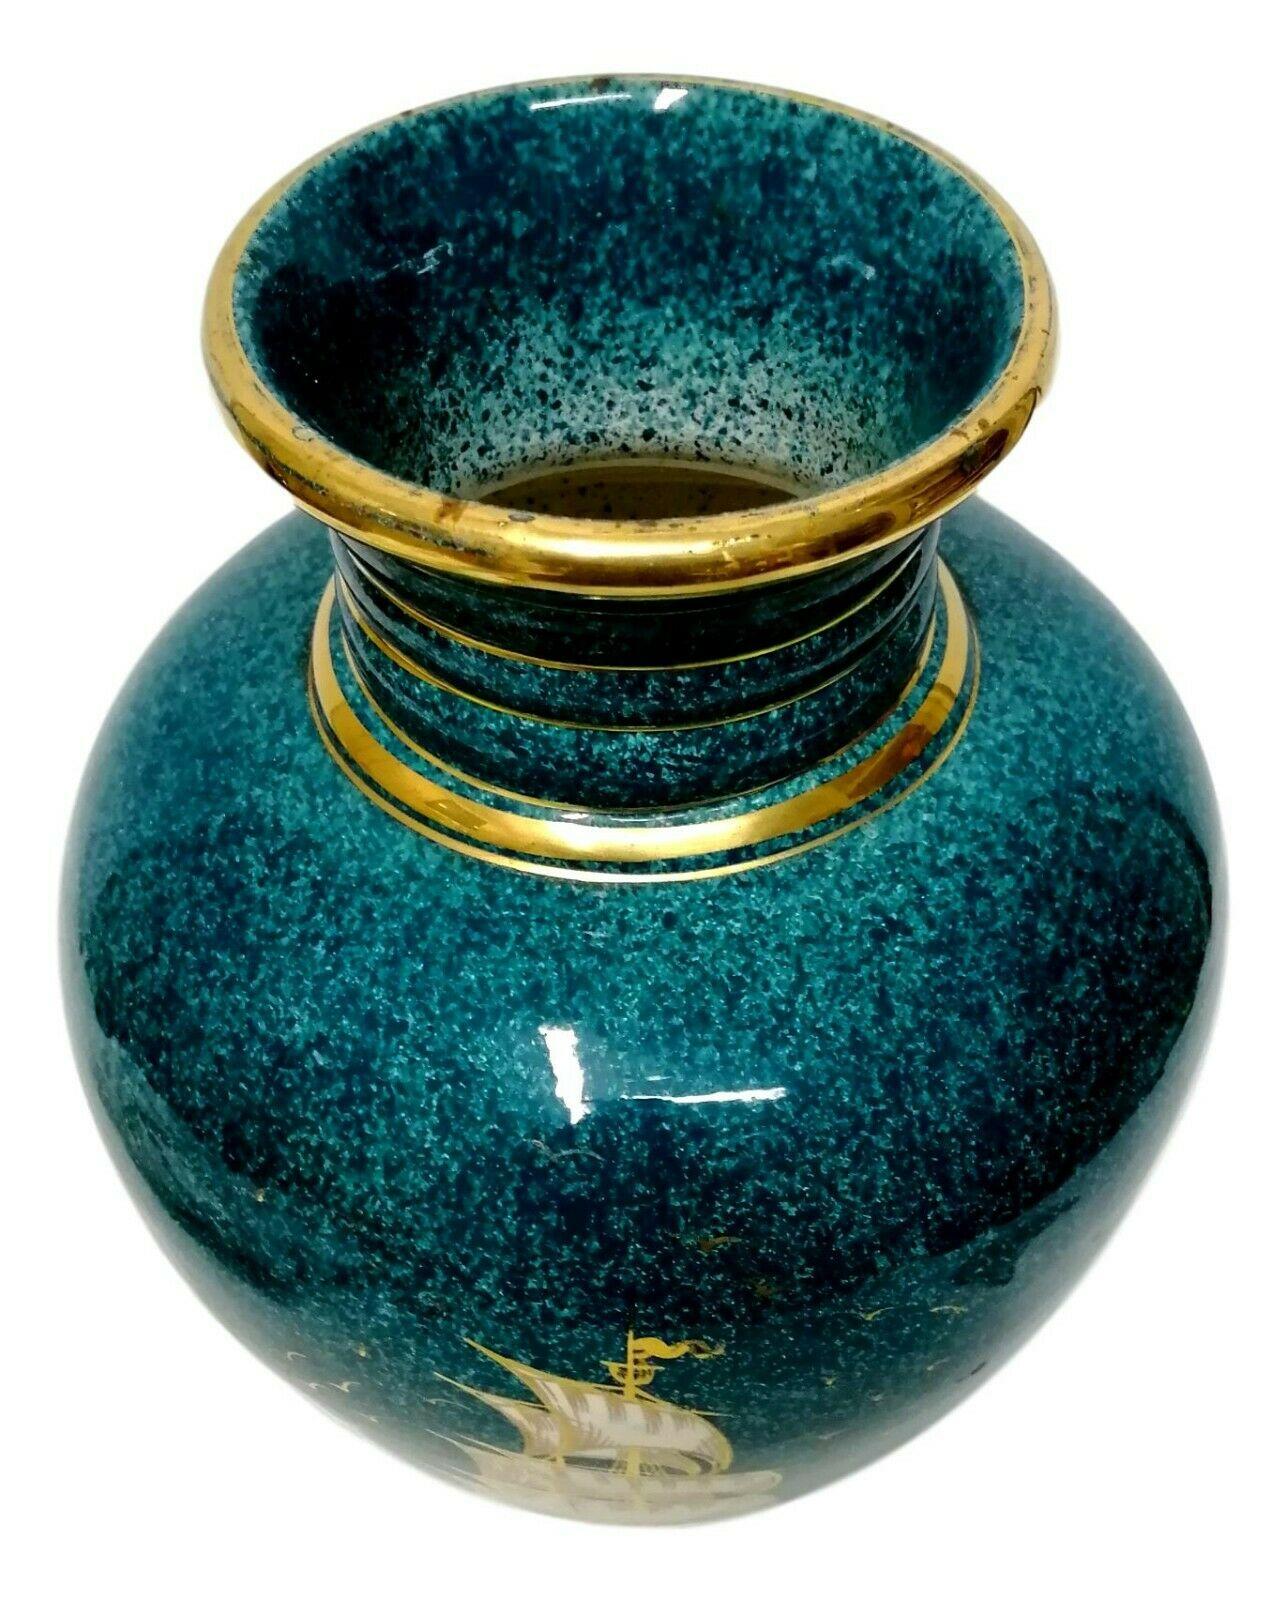 Mid-20th Century Ceramic Vase Produced by Barraud, Messeri & C., 1940s For Sale